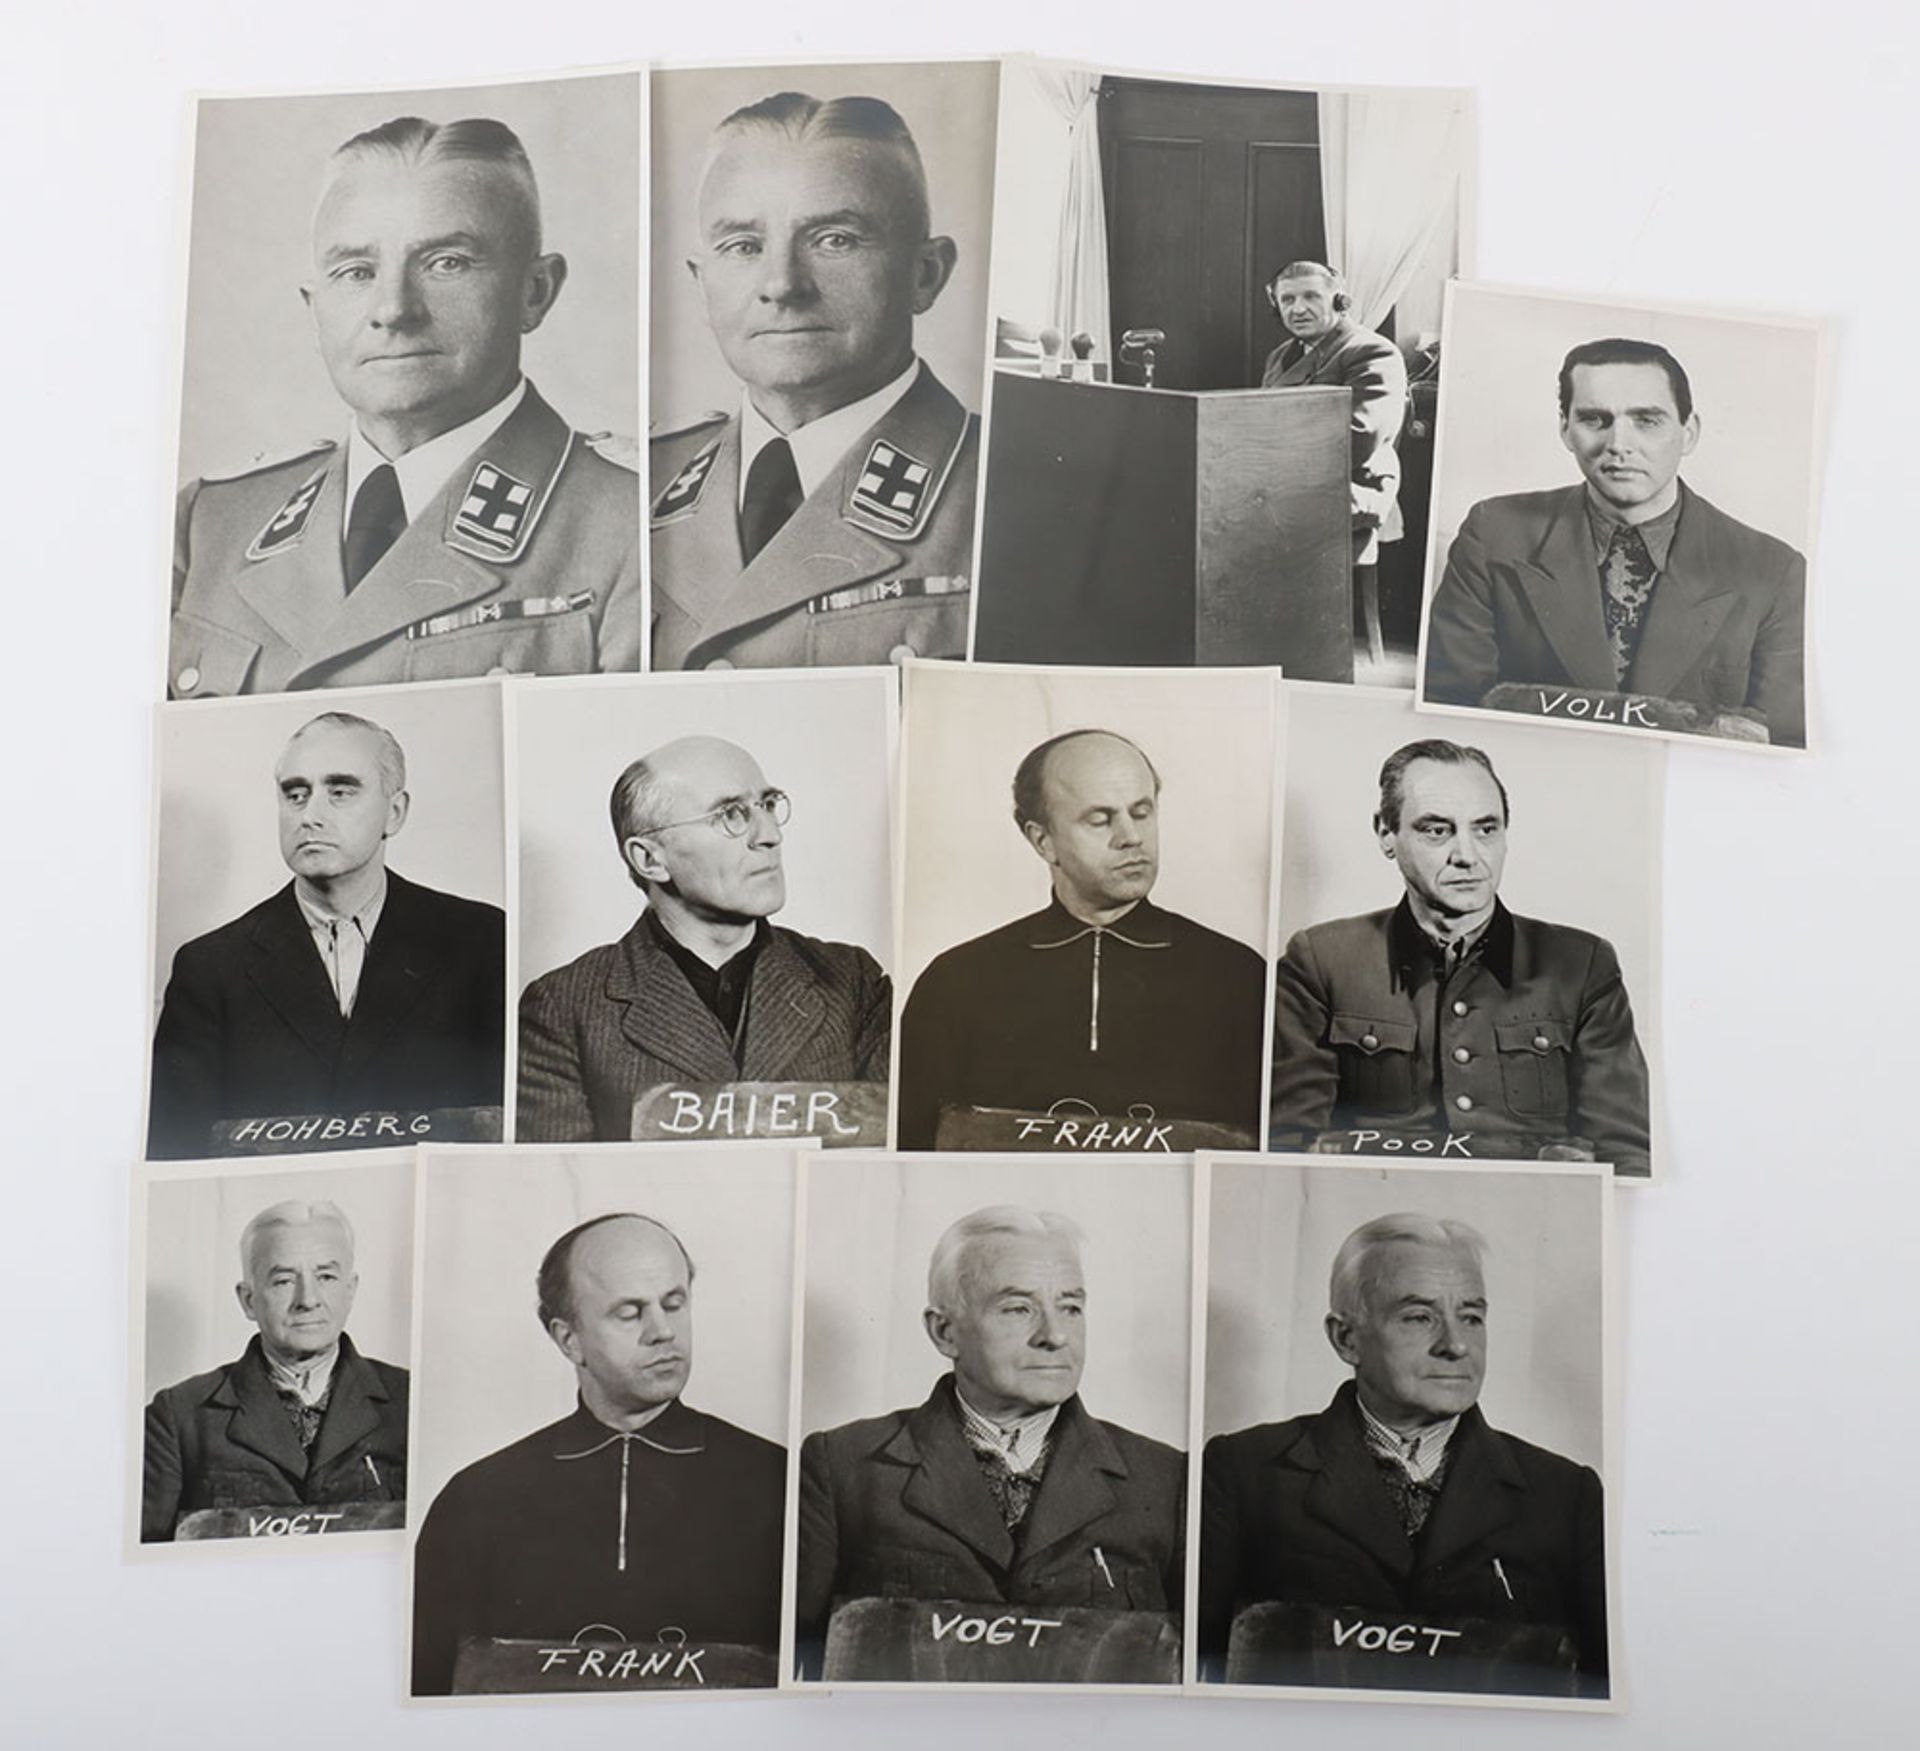 Nuremberg Trial, The Pohl Trial. Photographs of a number of the key defendents in this trial at Nure